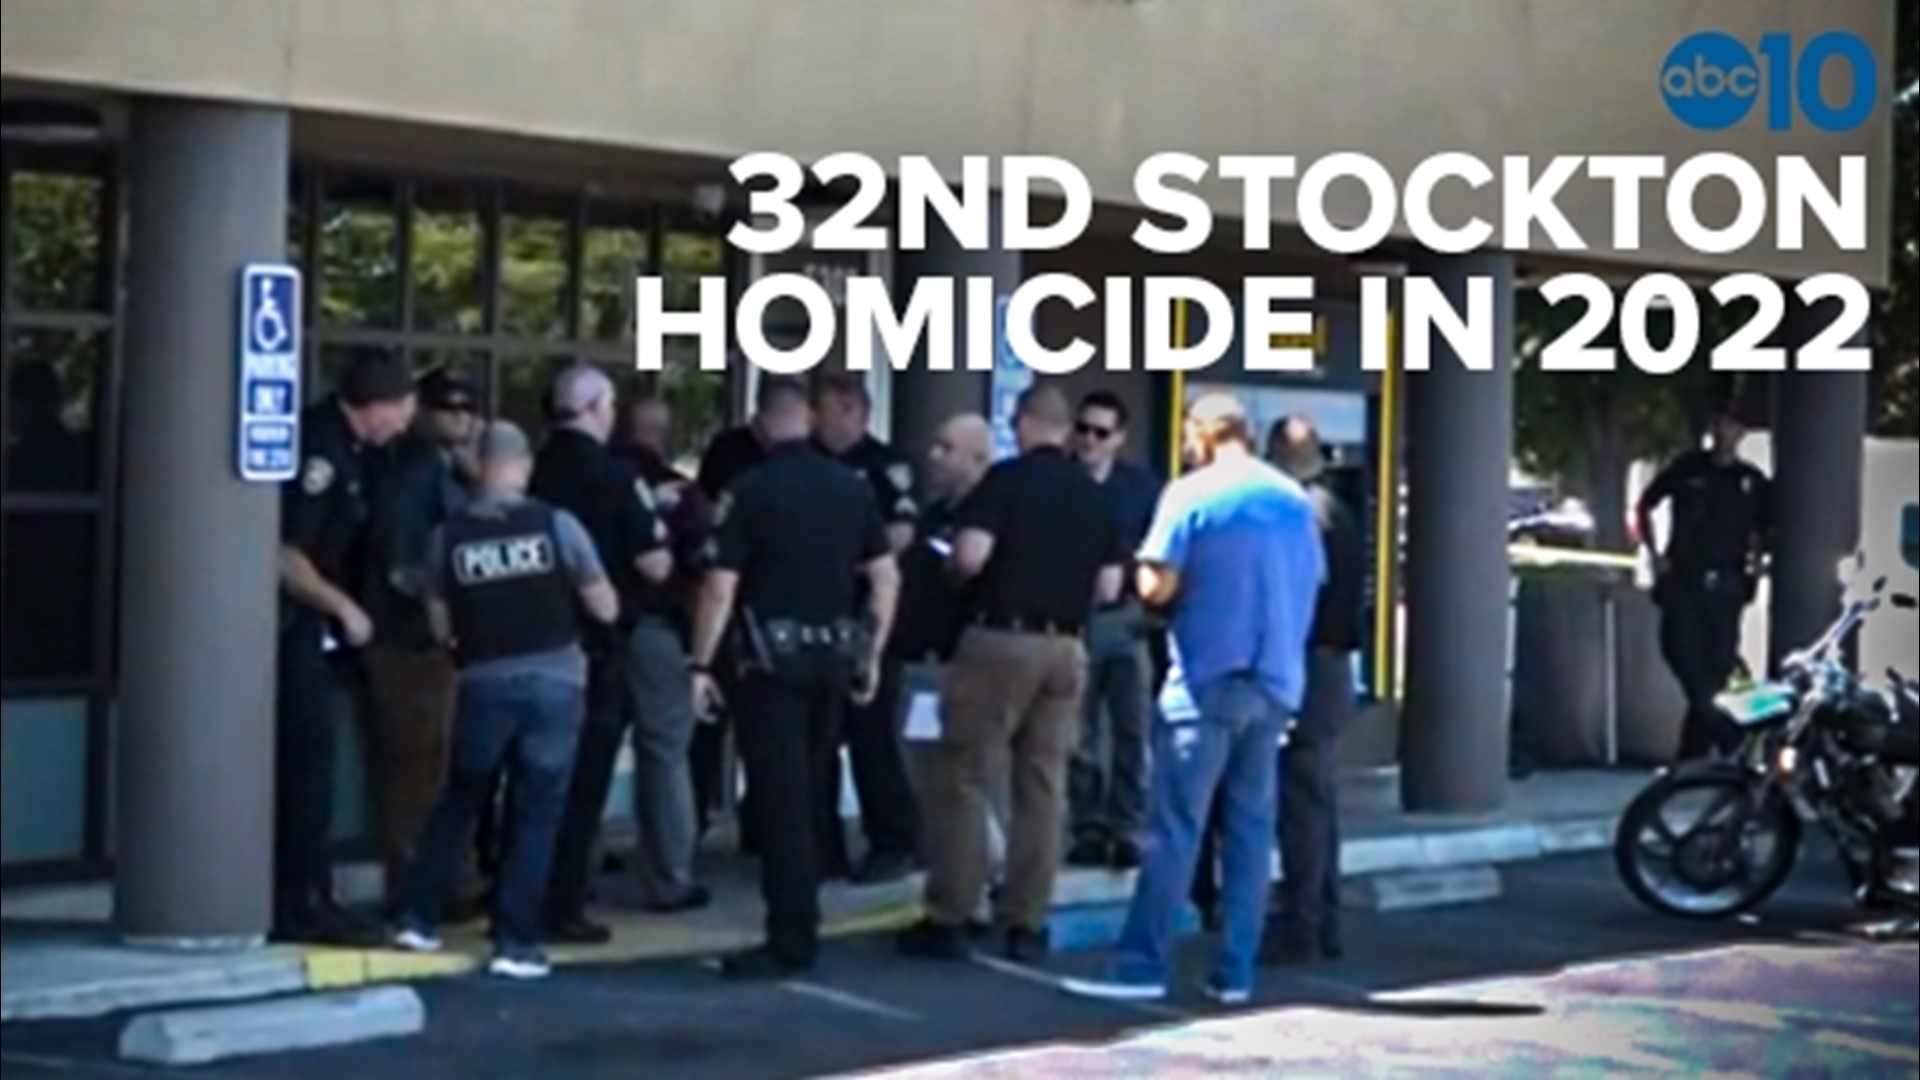 "It is unusual that we would see a brazen daytime shooting occur like this at the mall near the bank during daytime hours," said a Stockton Police spokesperson.